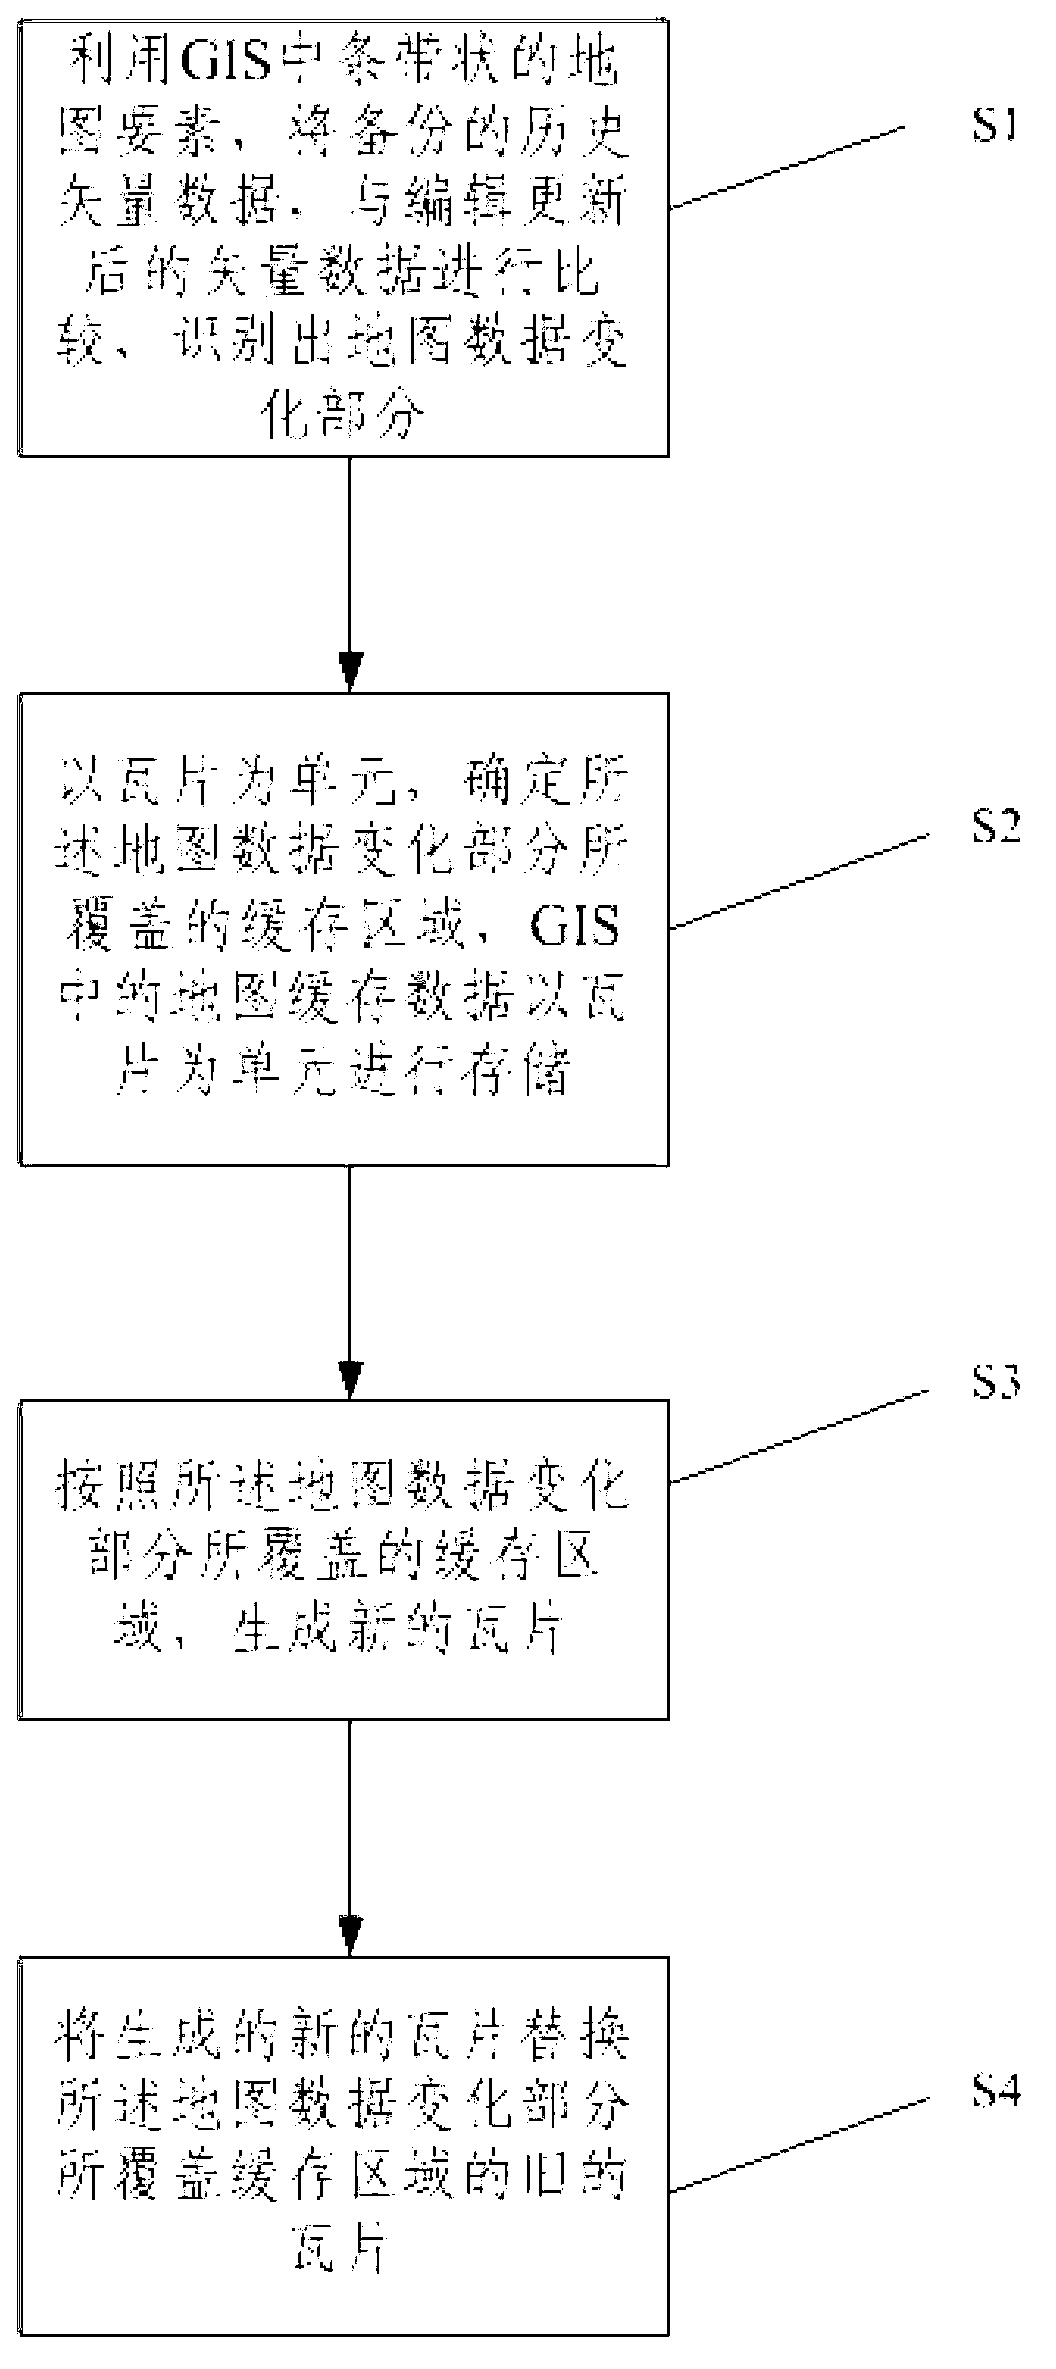 Cache updating method for stripped GIS (Geographic Information System) map elements